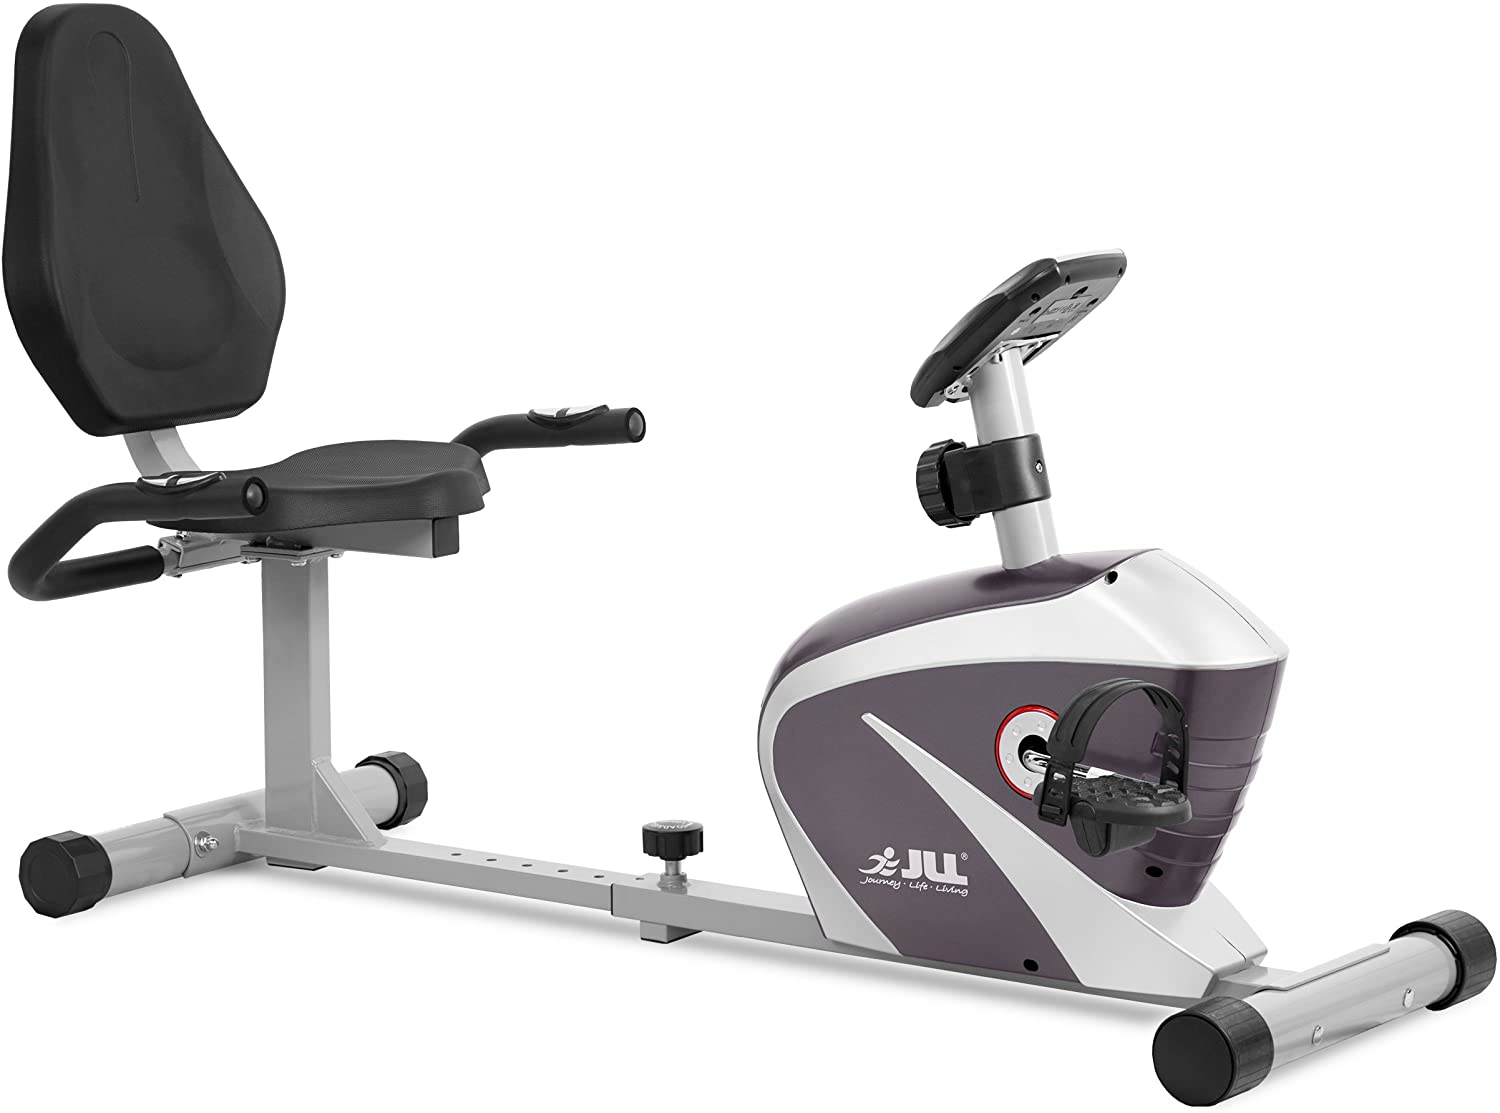 The 8 Best Recumbent Exercise Bikes Reviews and Buying Guide